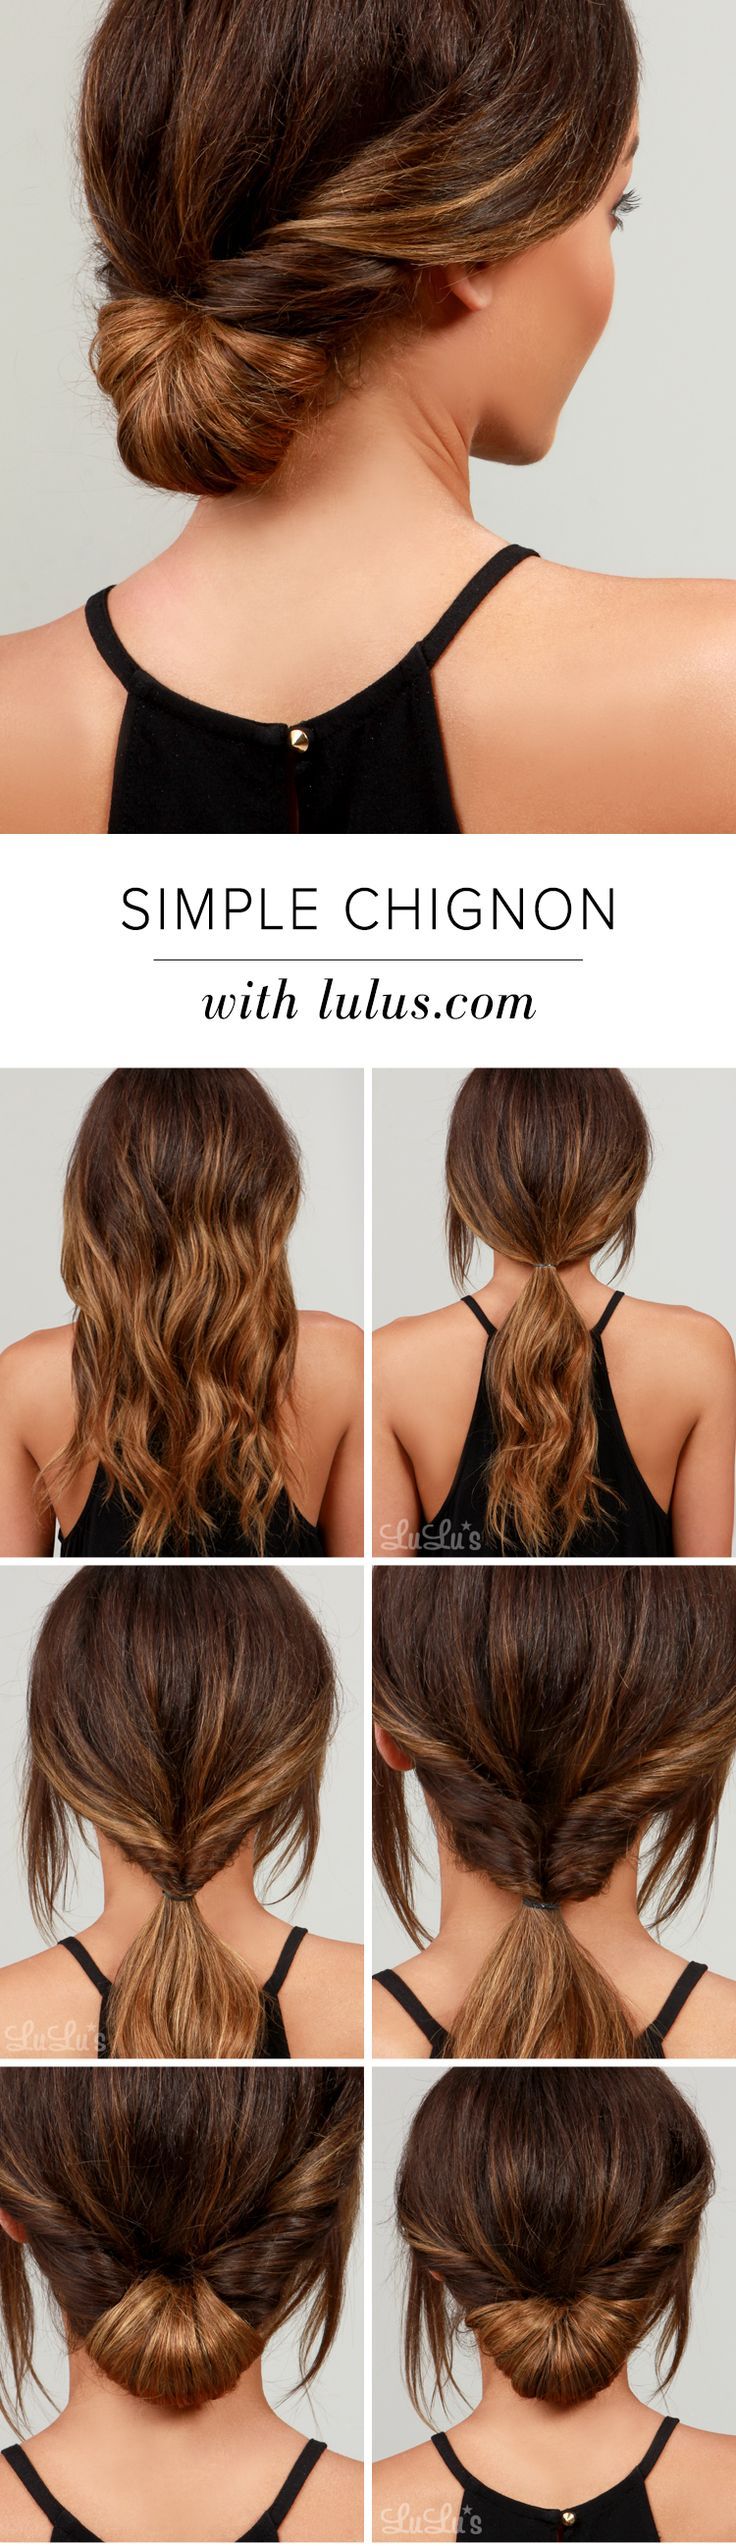 LuLu*s How-To: Simple Chignon Hair Tutorial. Step by step tutorial for getting a...